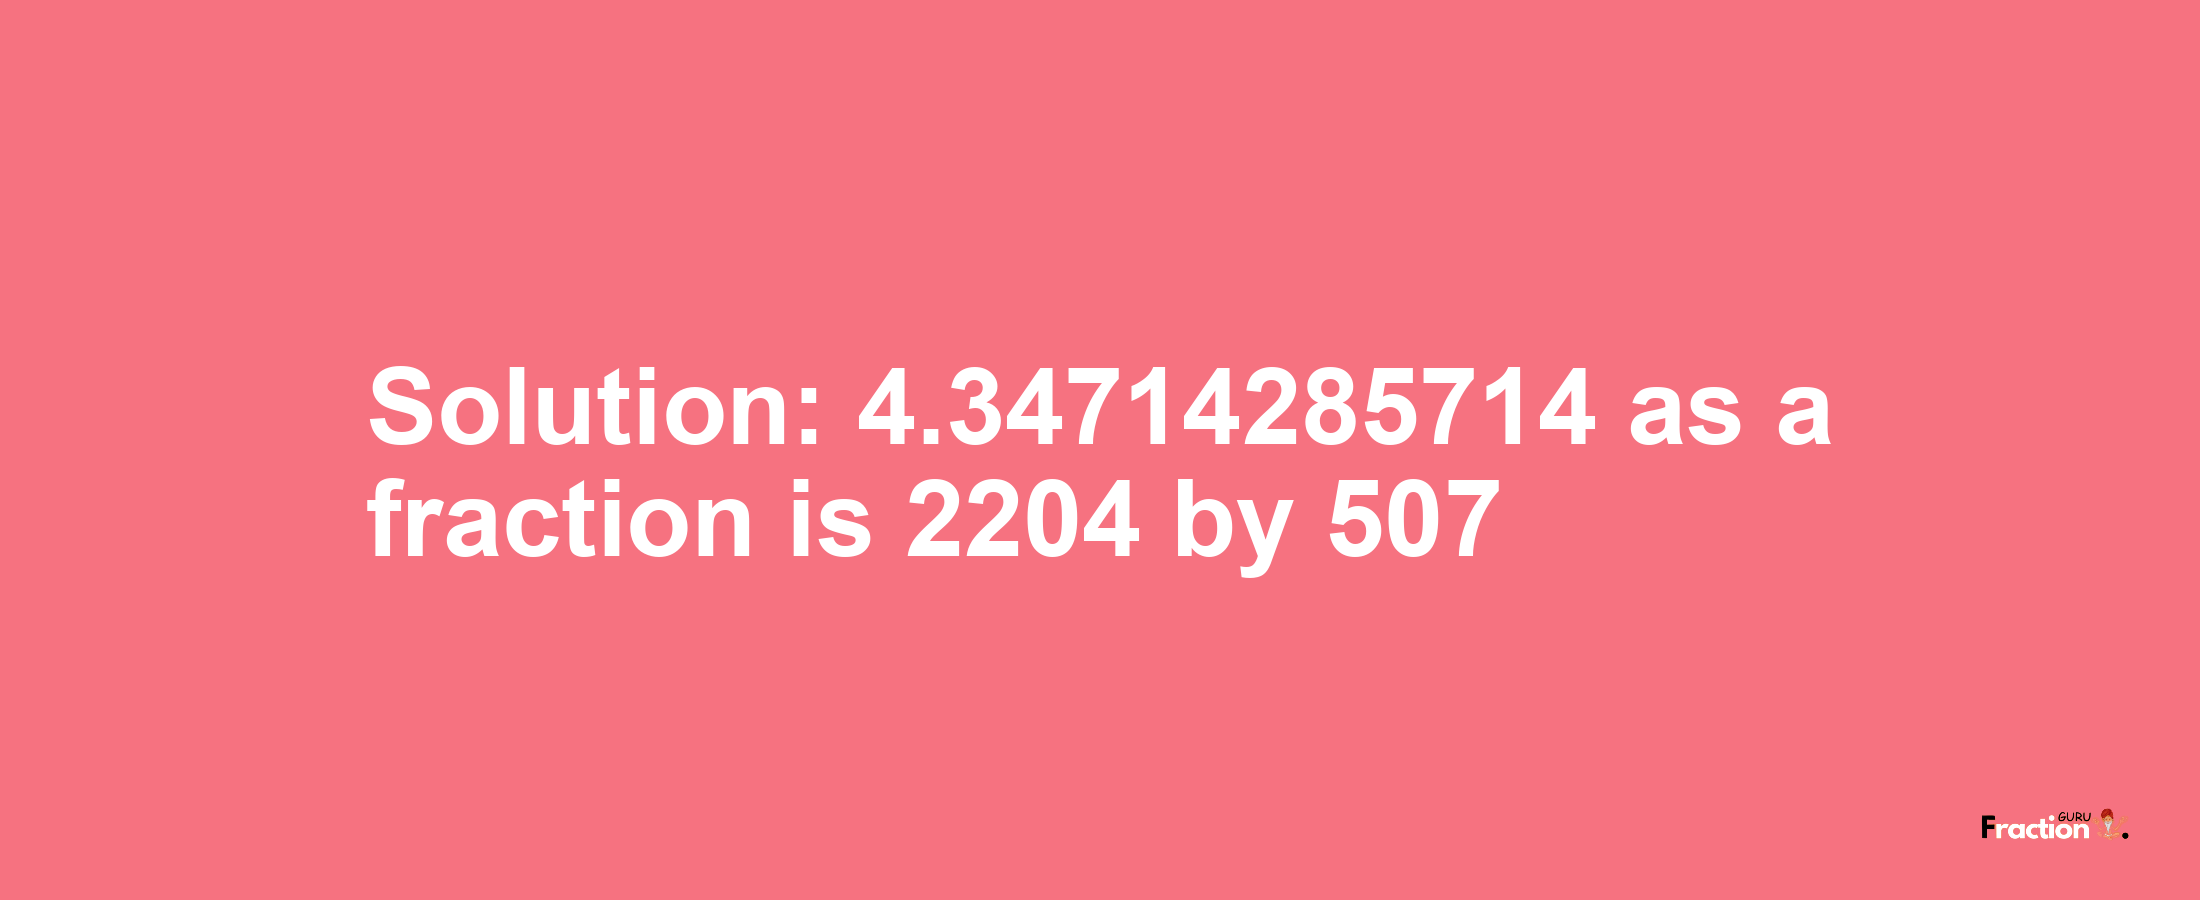 Solution:4.34714285714 as a fraction is 2204/507